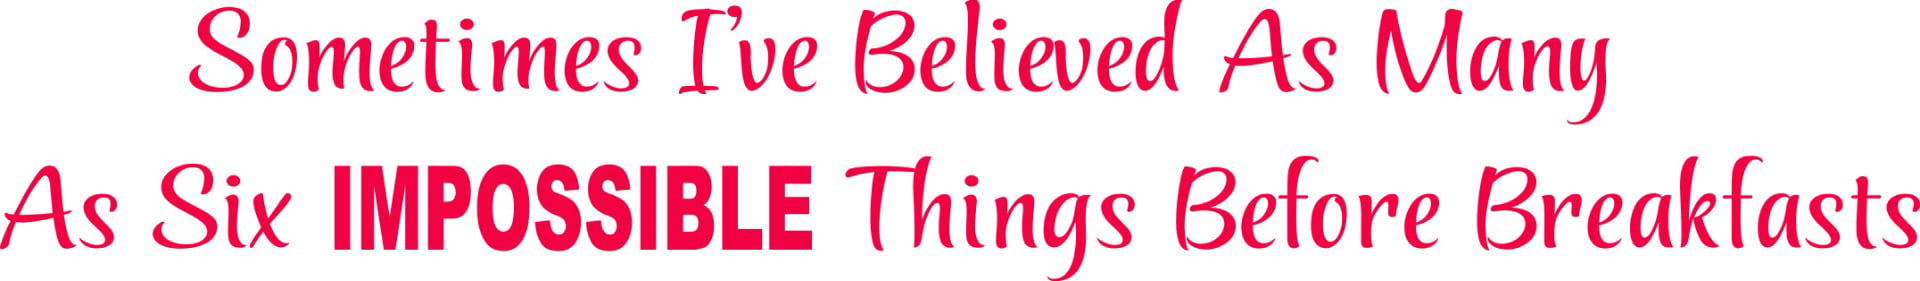 Design with Vinyl SOS 1013 3 A Sometimes Ive Believed as Many as Six Impossible Things Before Breakfast Vinyl Wall Decal Quote 20 x 24 Red 